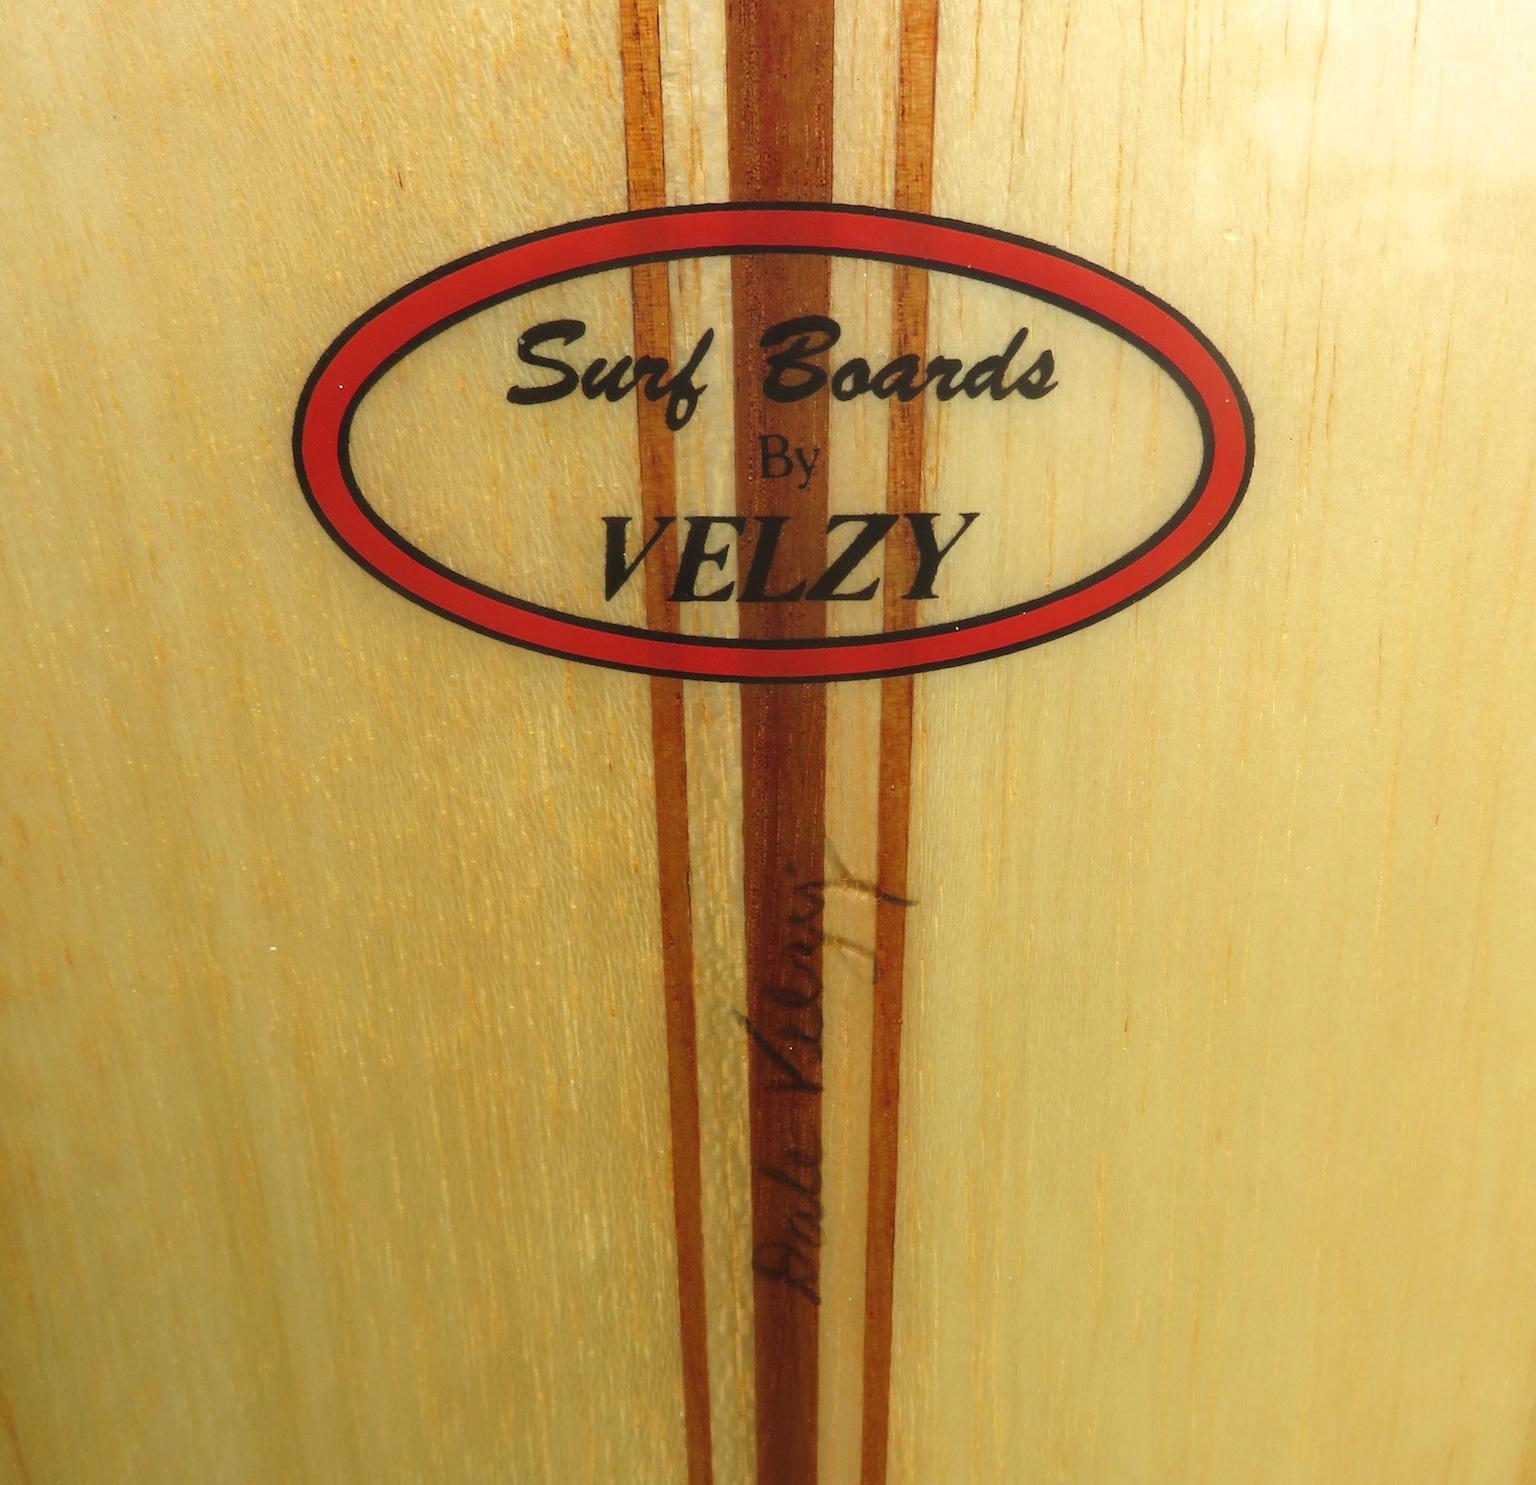 velzy surfboards for sale